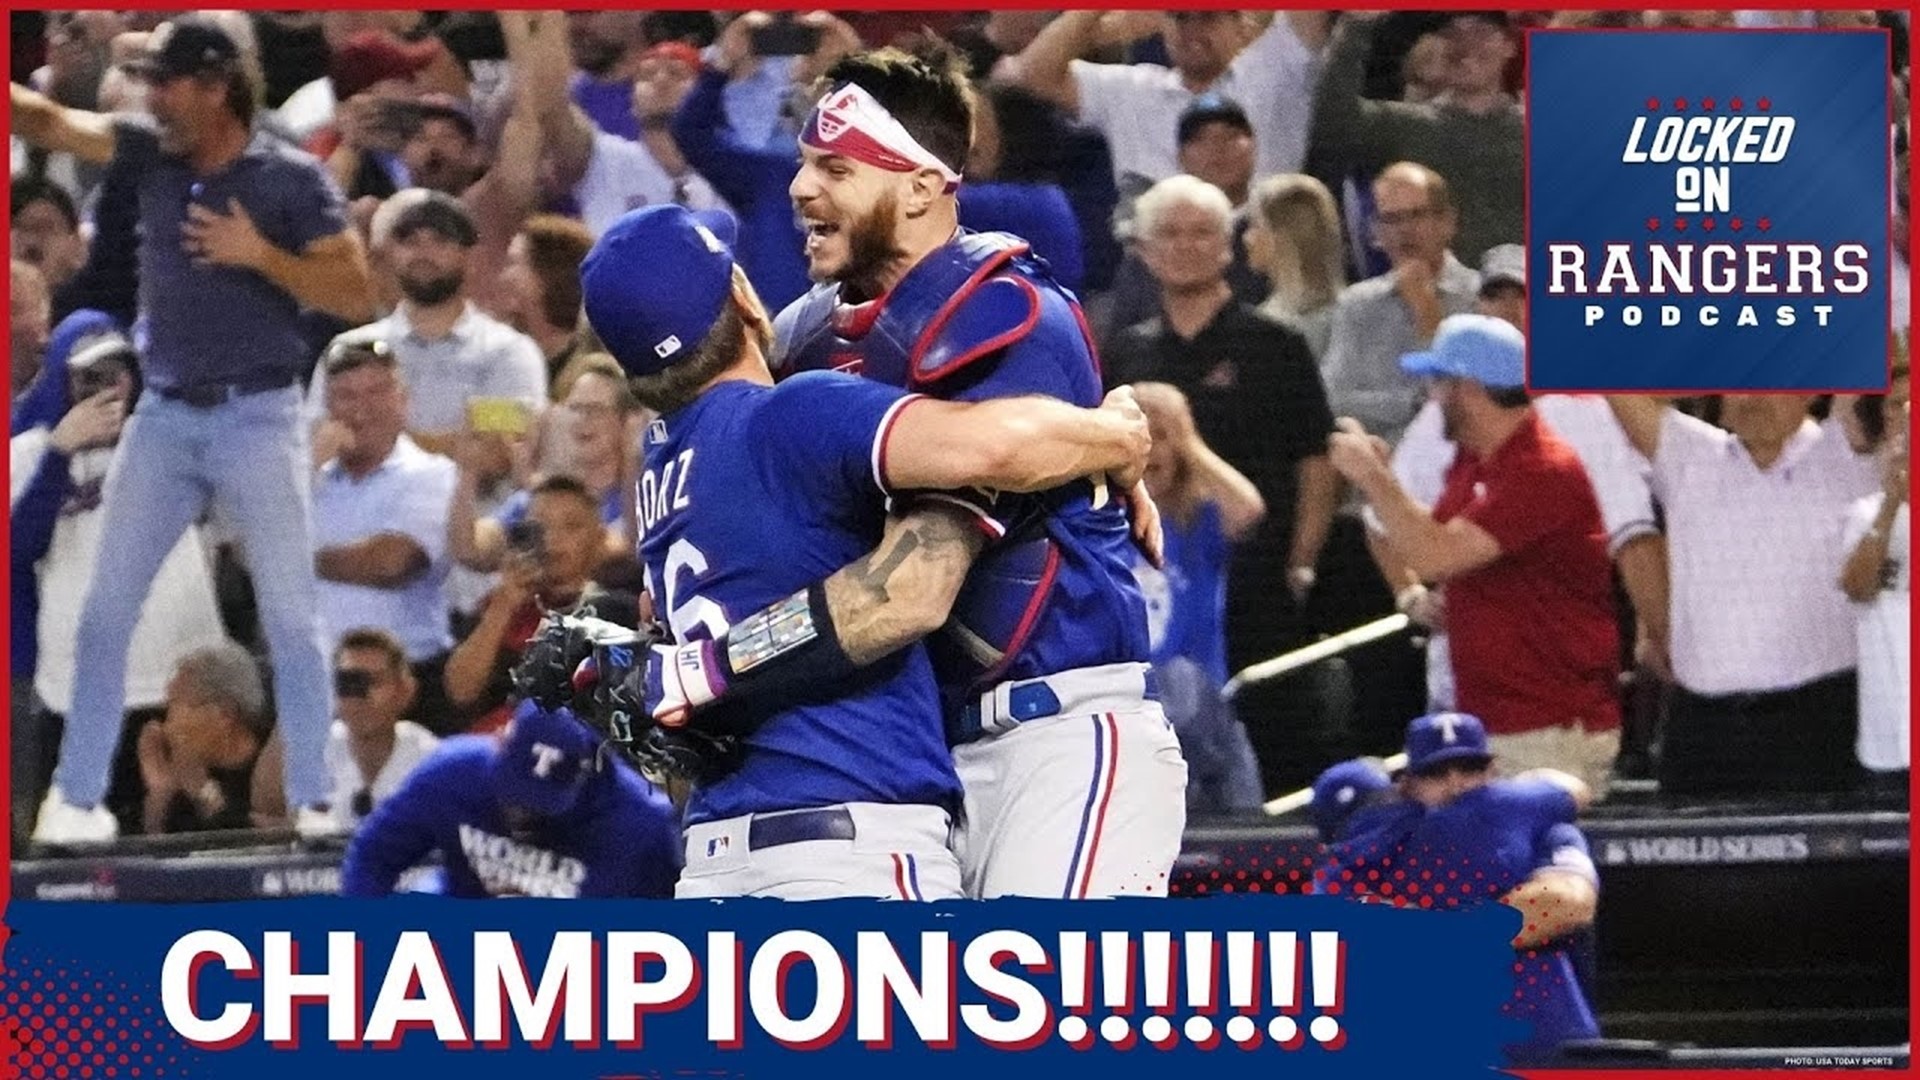 The Texas Rangers won their first World Series title in franchise history thanks to dominance from Corey Seager, Marcus Semien and Nathan Eovaldi.